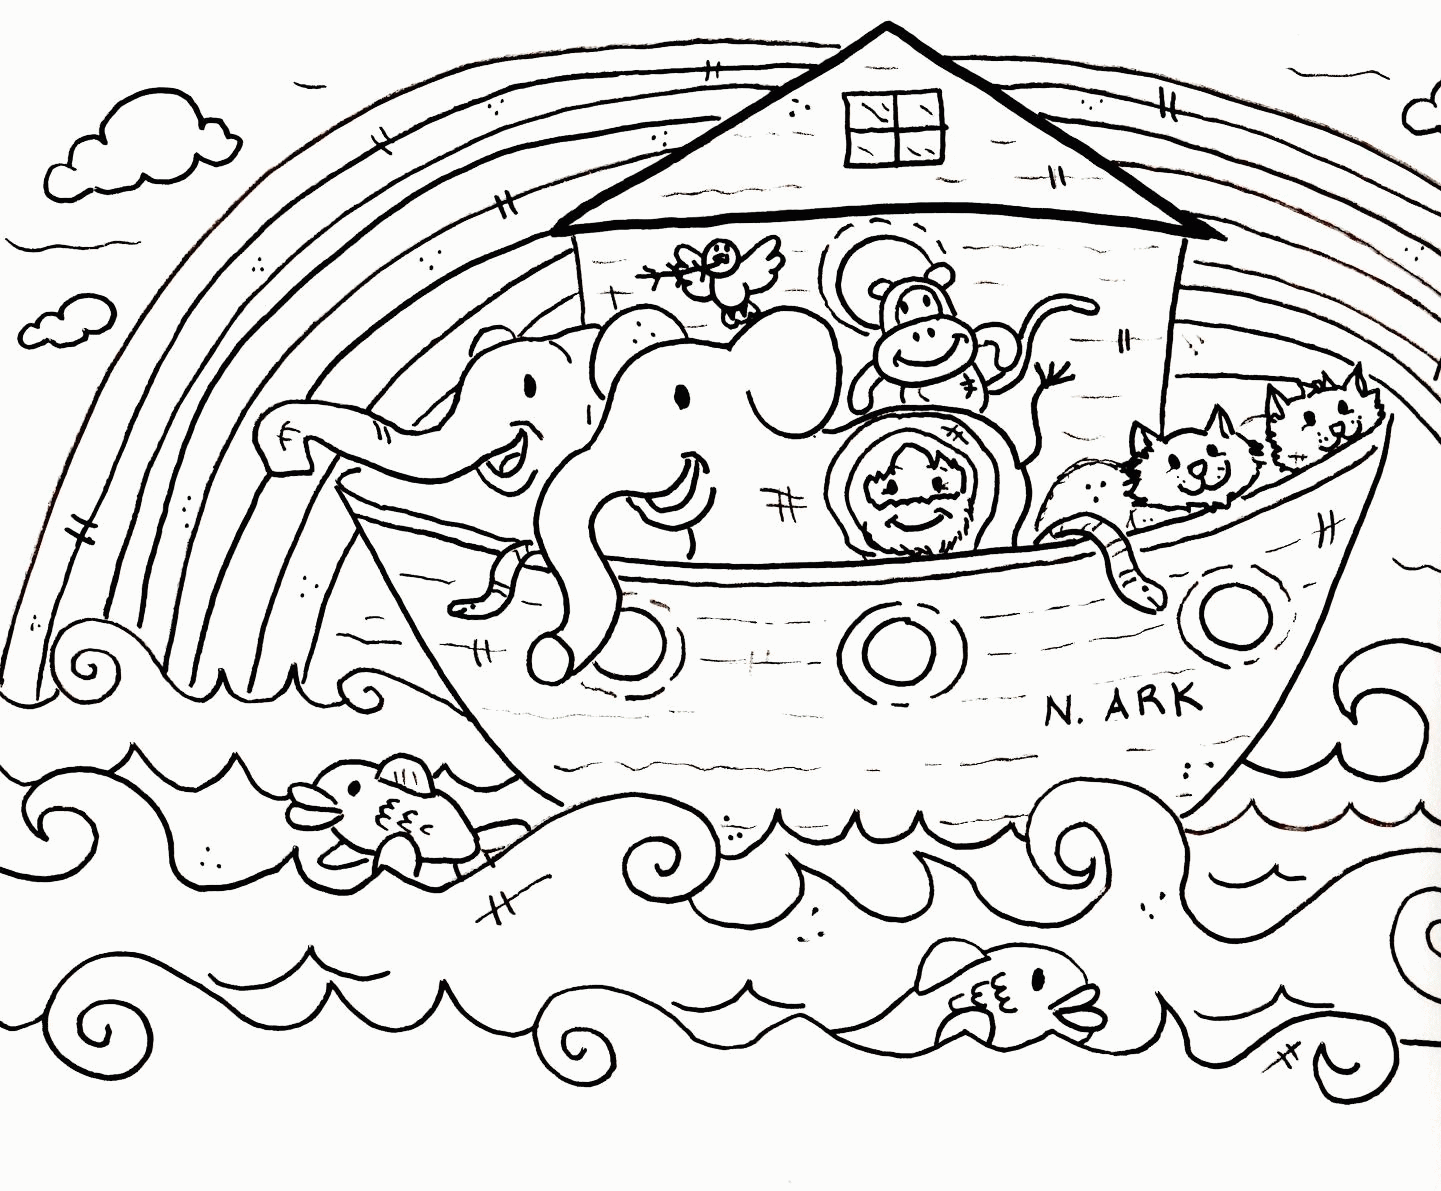 Coloring Pages Amusing Free Bible Coloring Pages For Kids Free